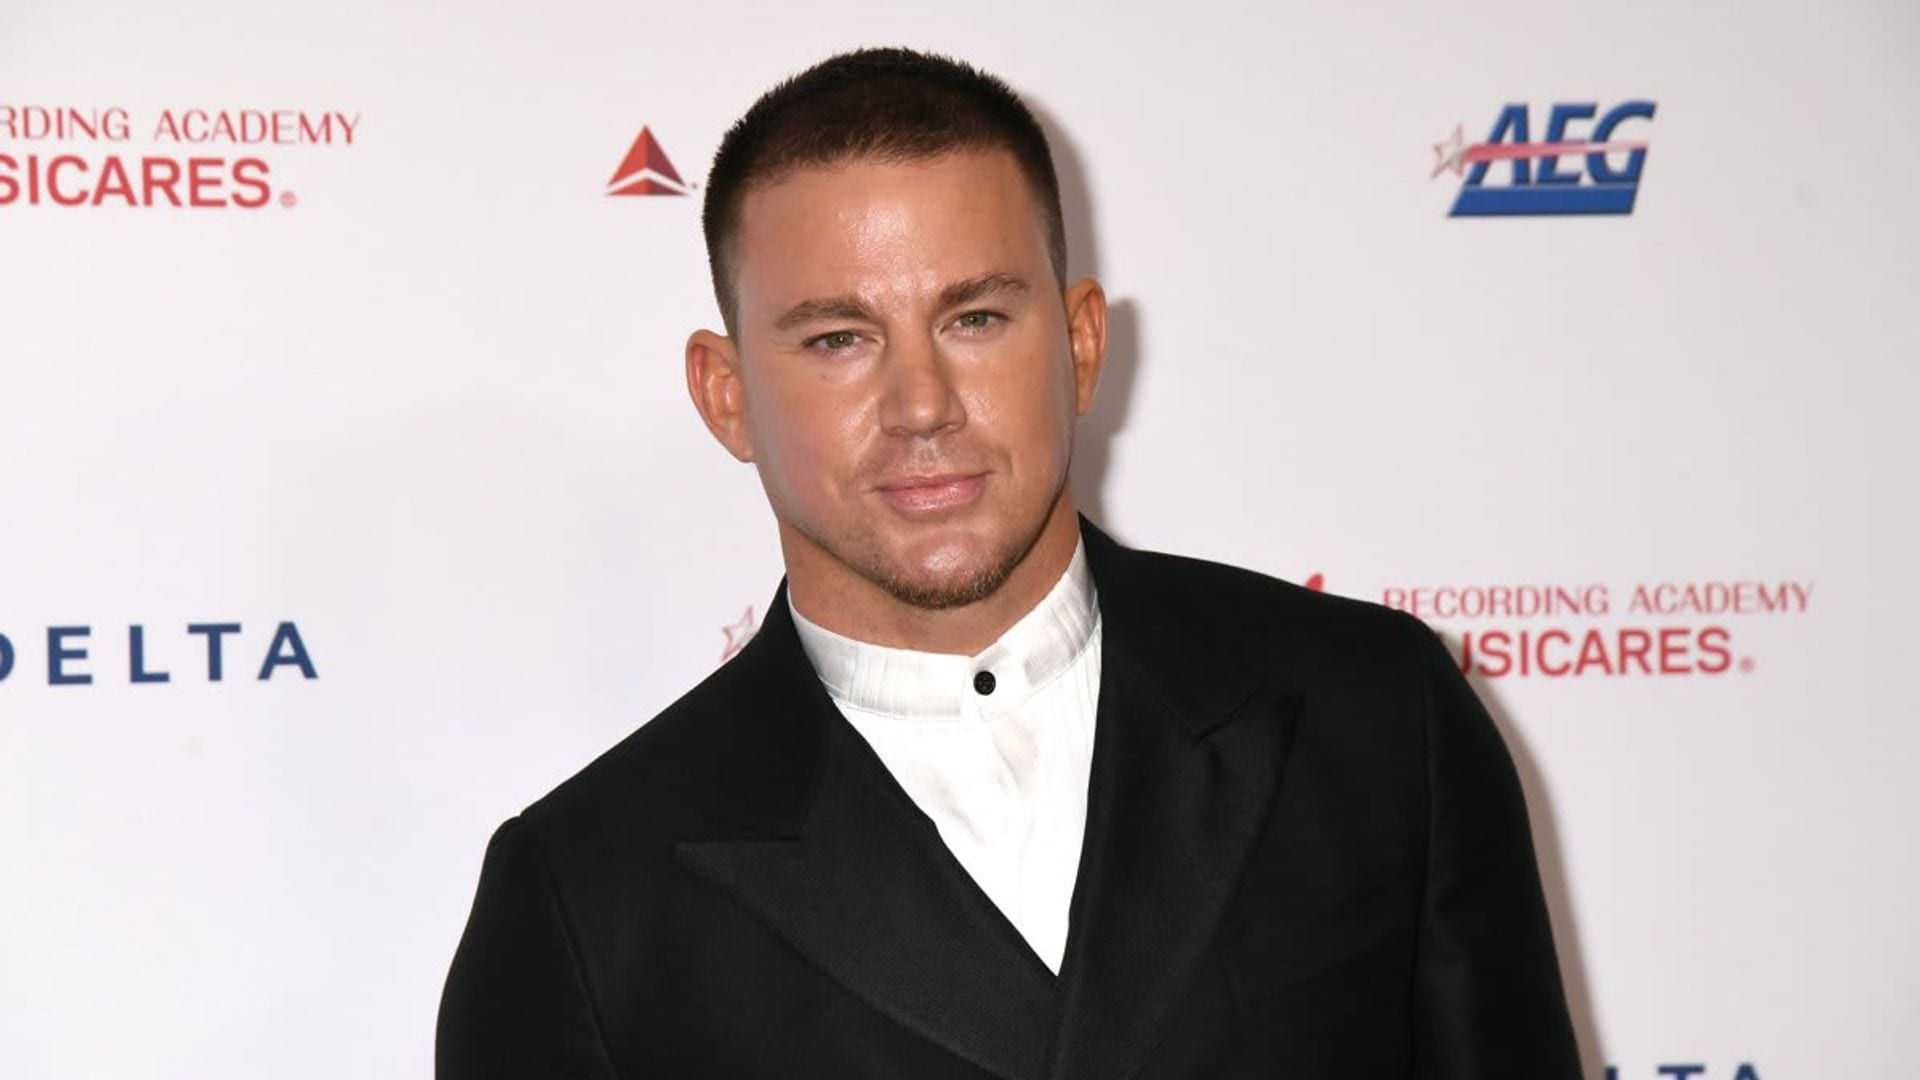 Channing Tatum is a shirtless author who wrote a children’s book while in quarantine